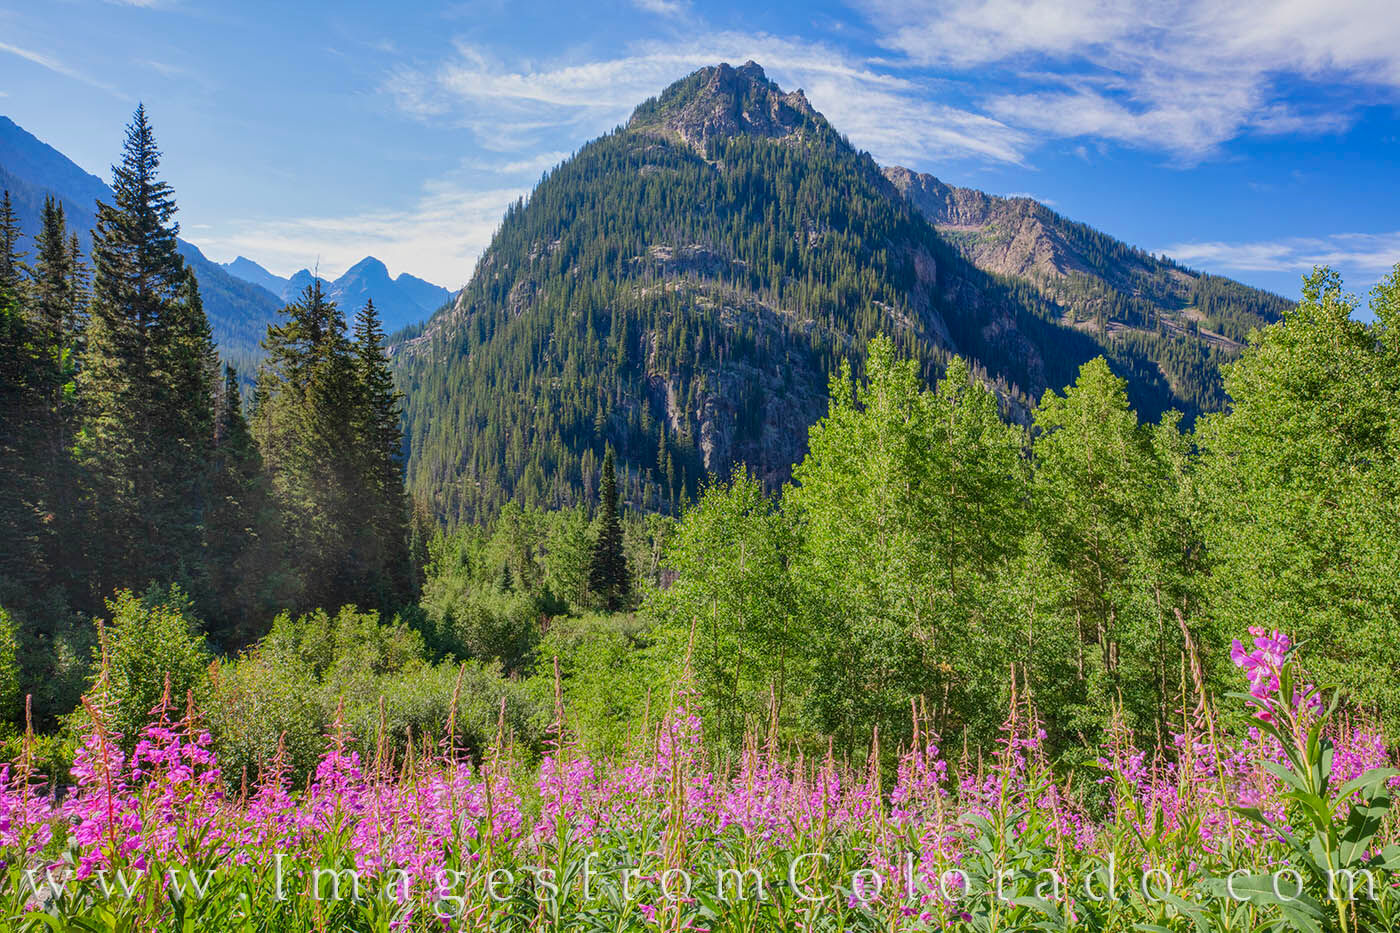 On the Upper Piney Lake Trail near Vail in Summit County, a small batch of fireweed adds bright color to the green of the meadow...